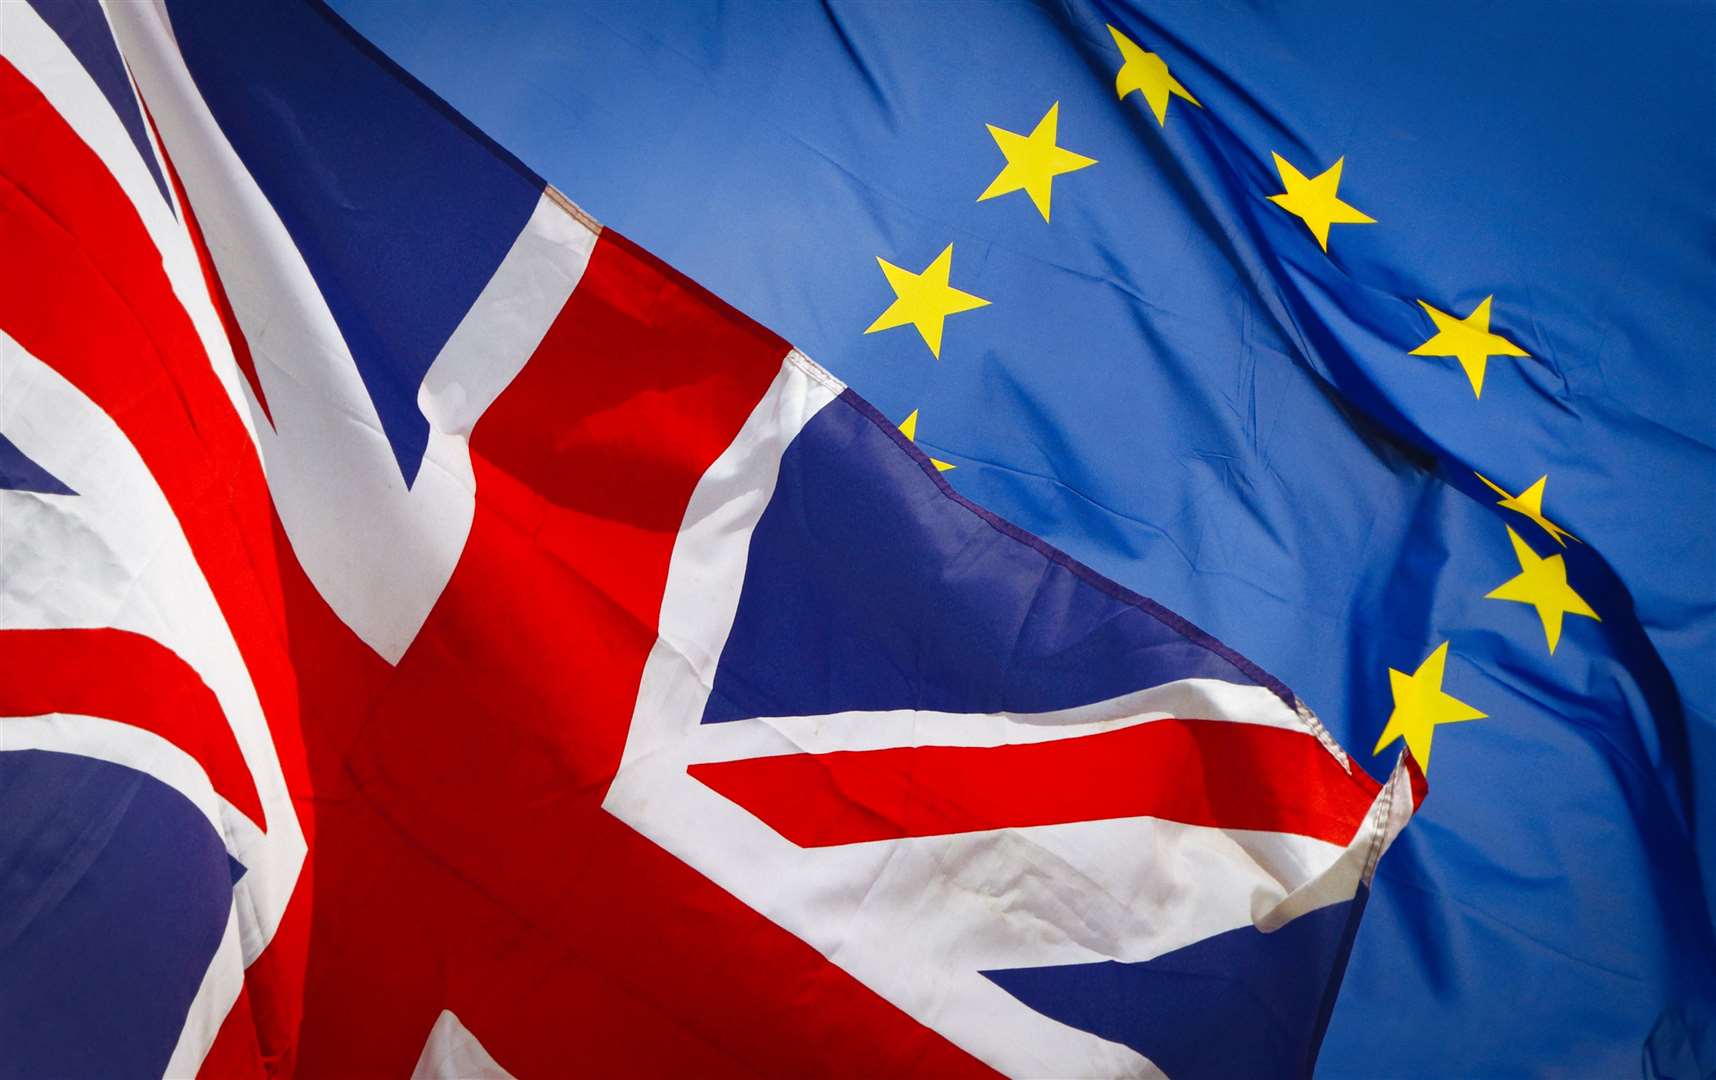 It is five years since the Brexit referendum vote. Picture: istock/narvikk